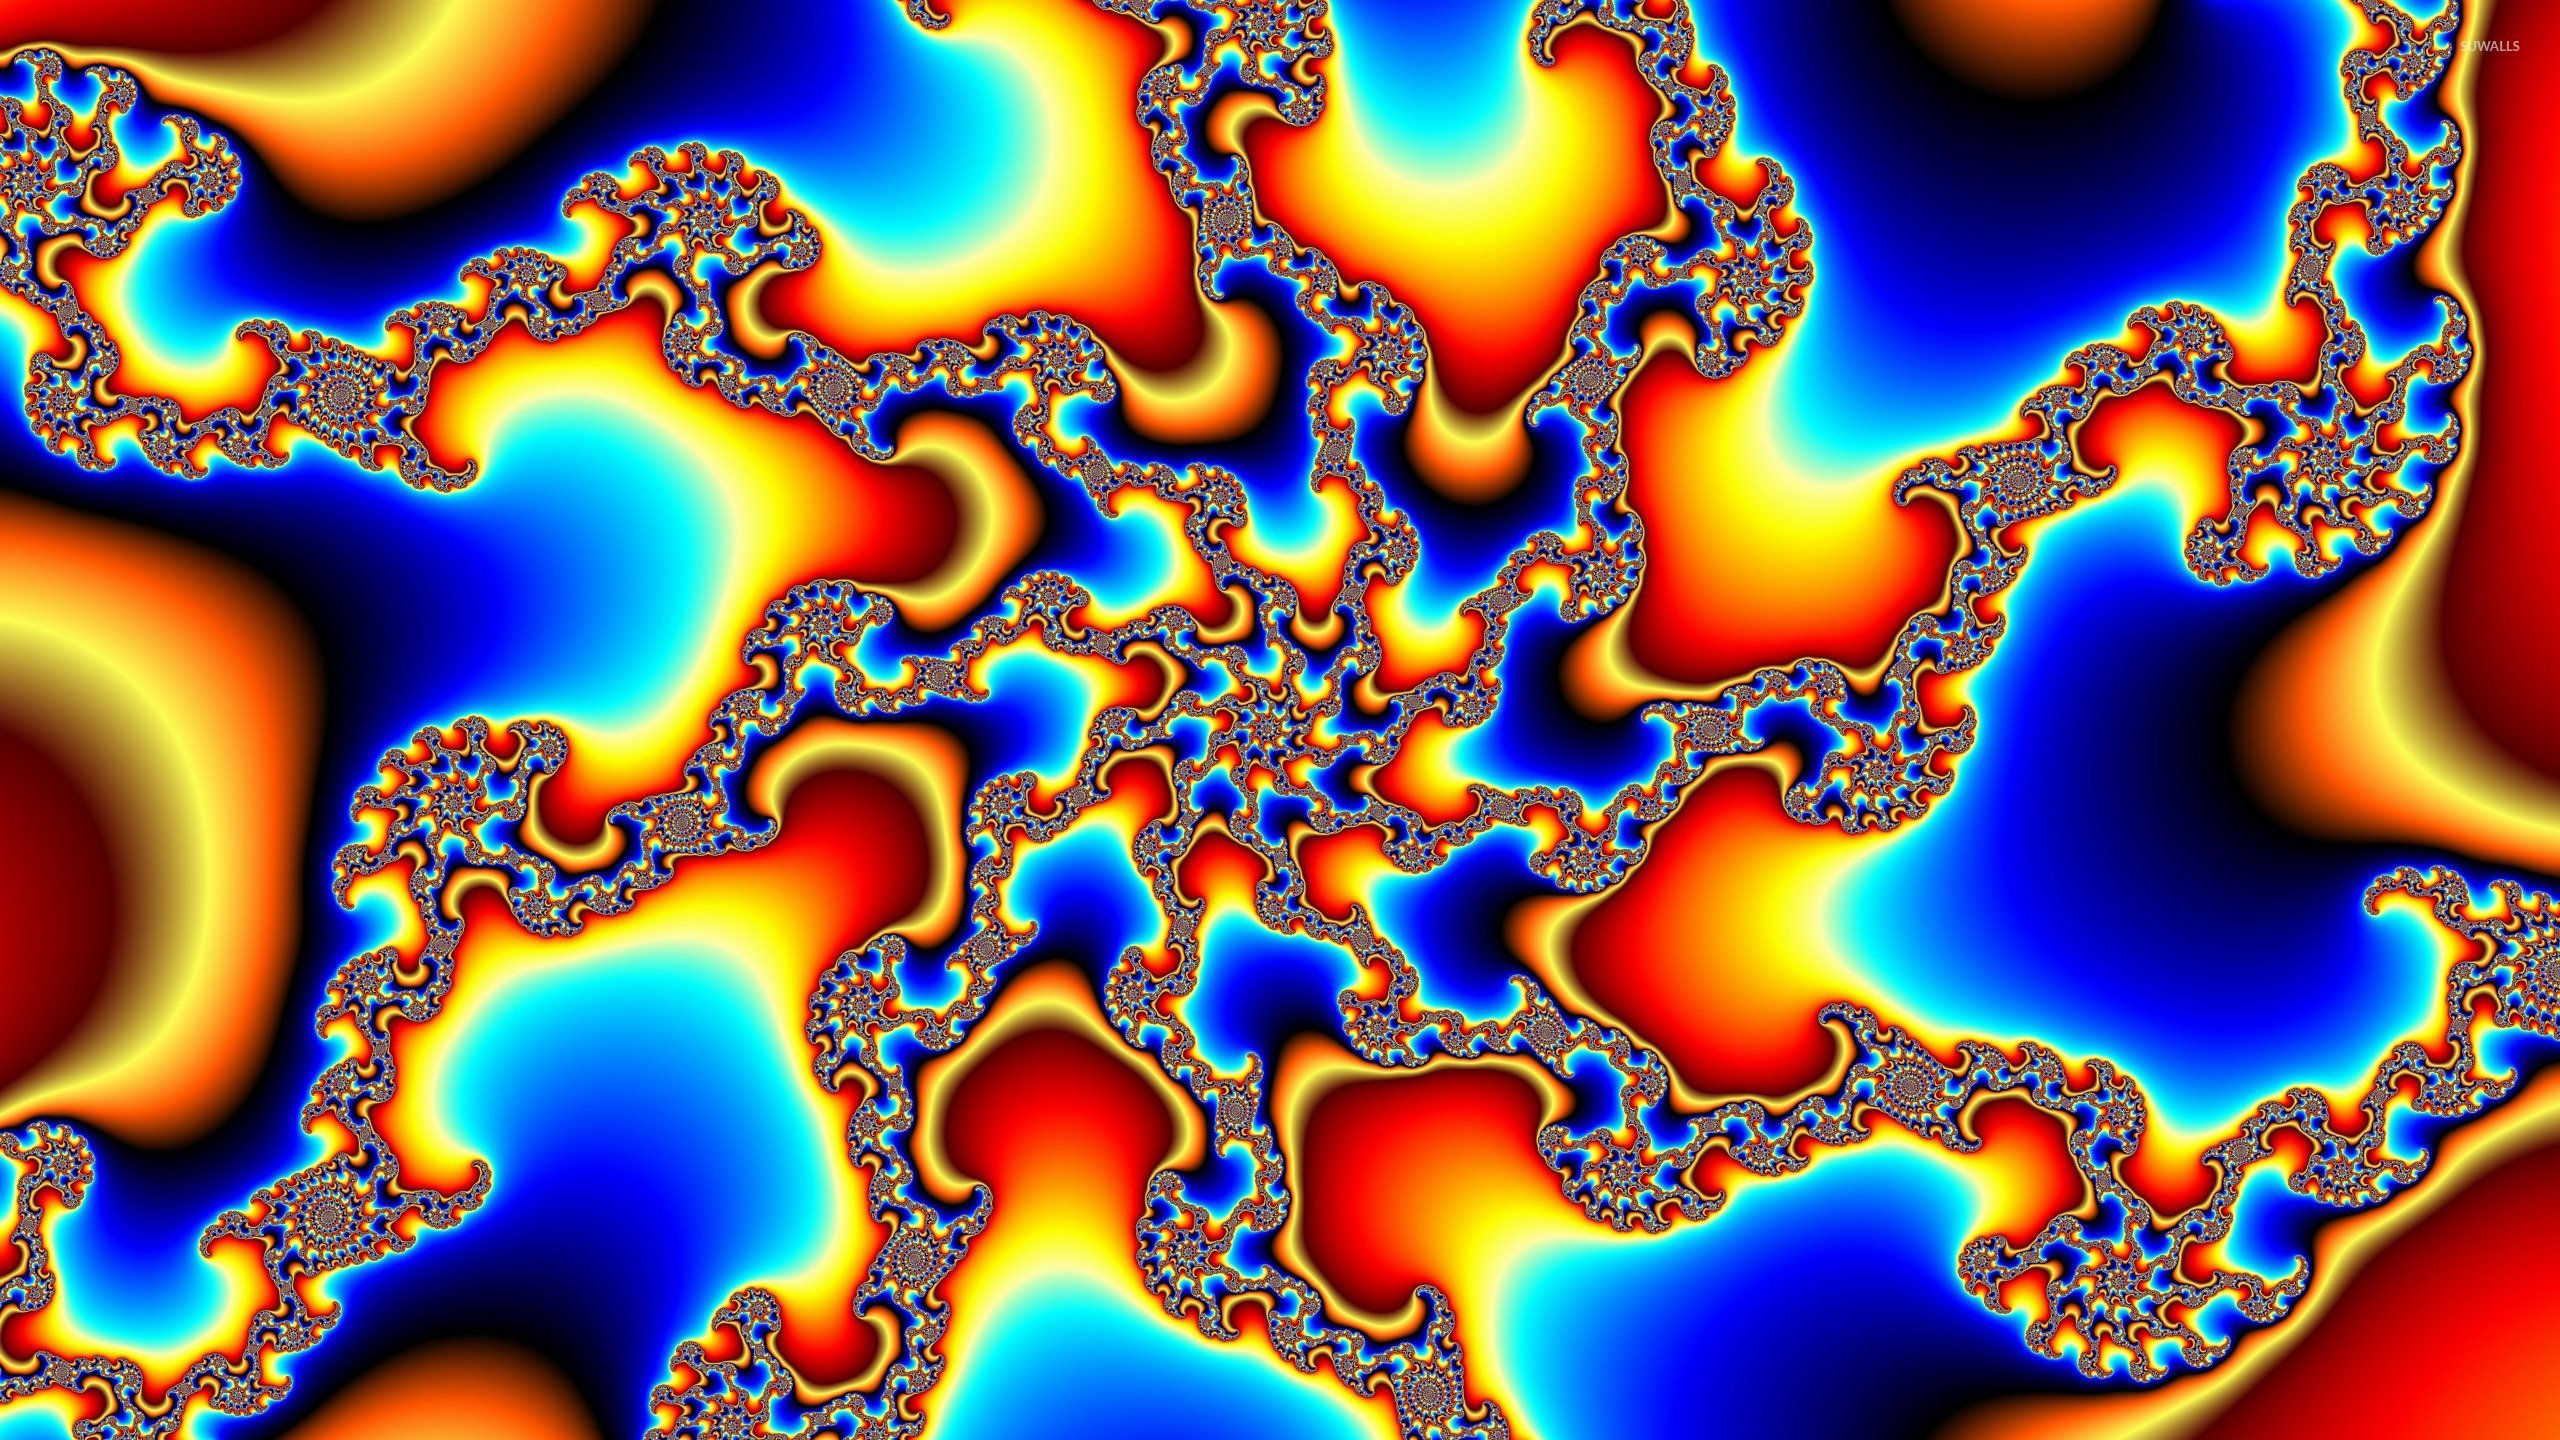 Abstract Hypnotic Wallpaper 